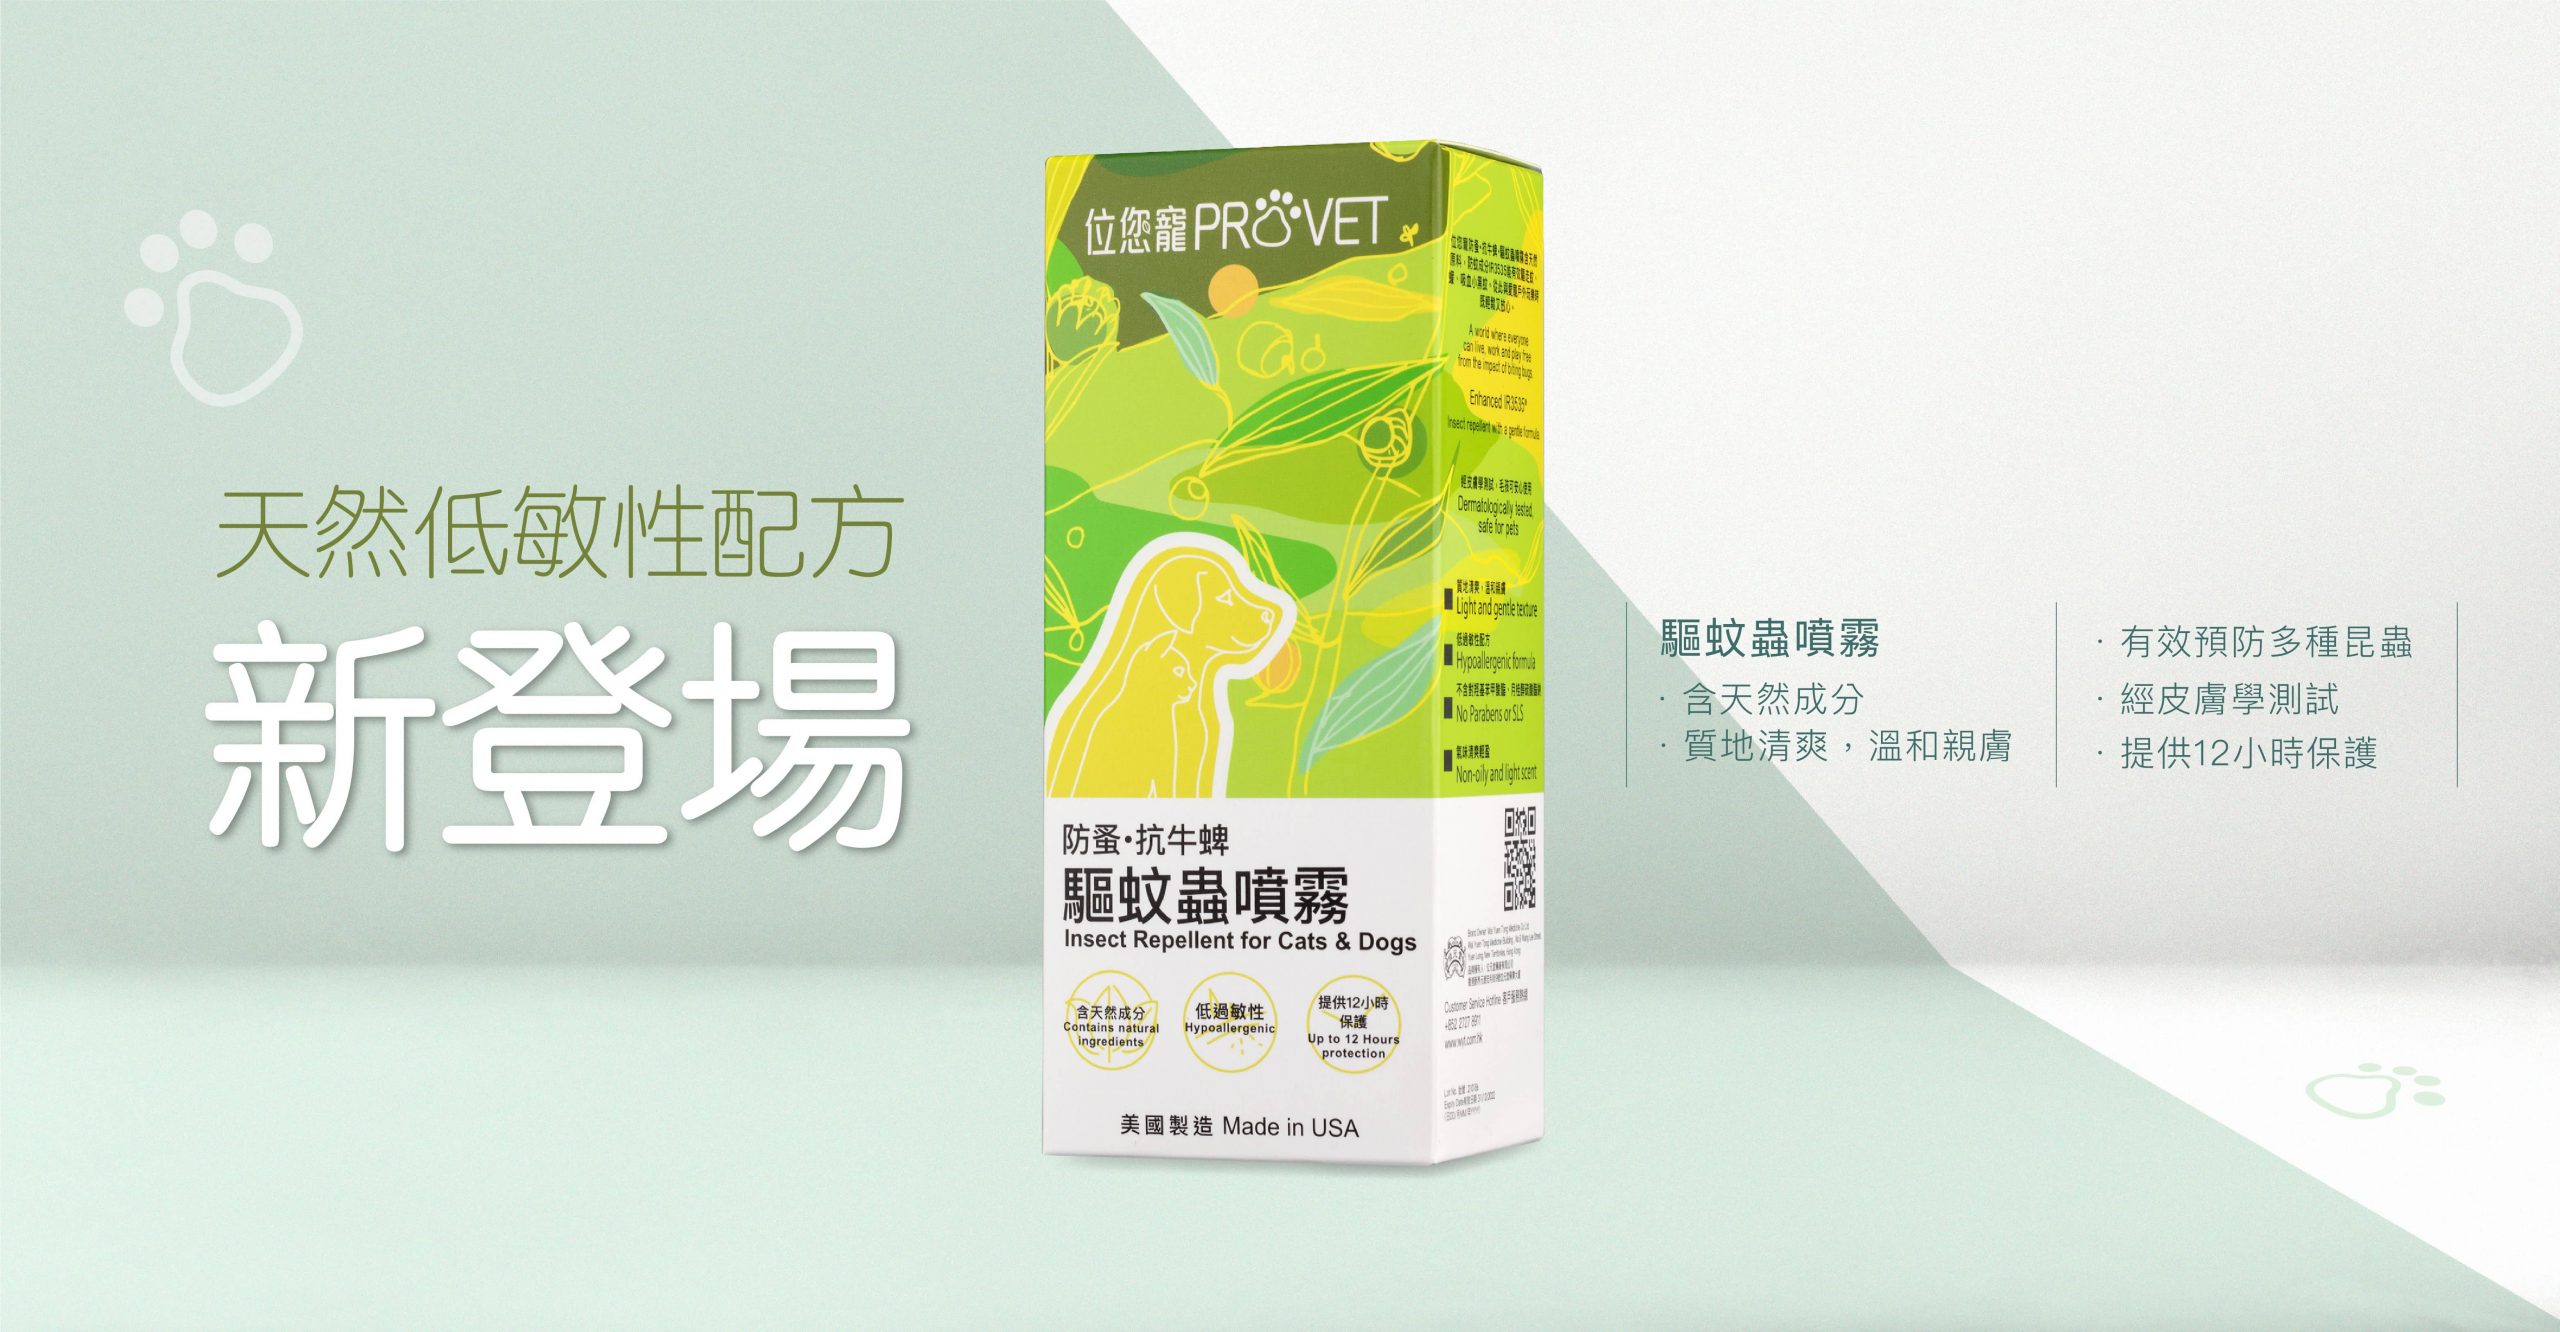 Provet Insect Spray